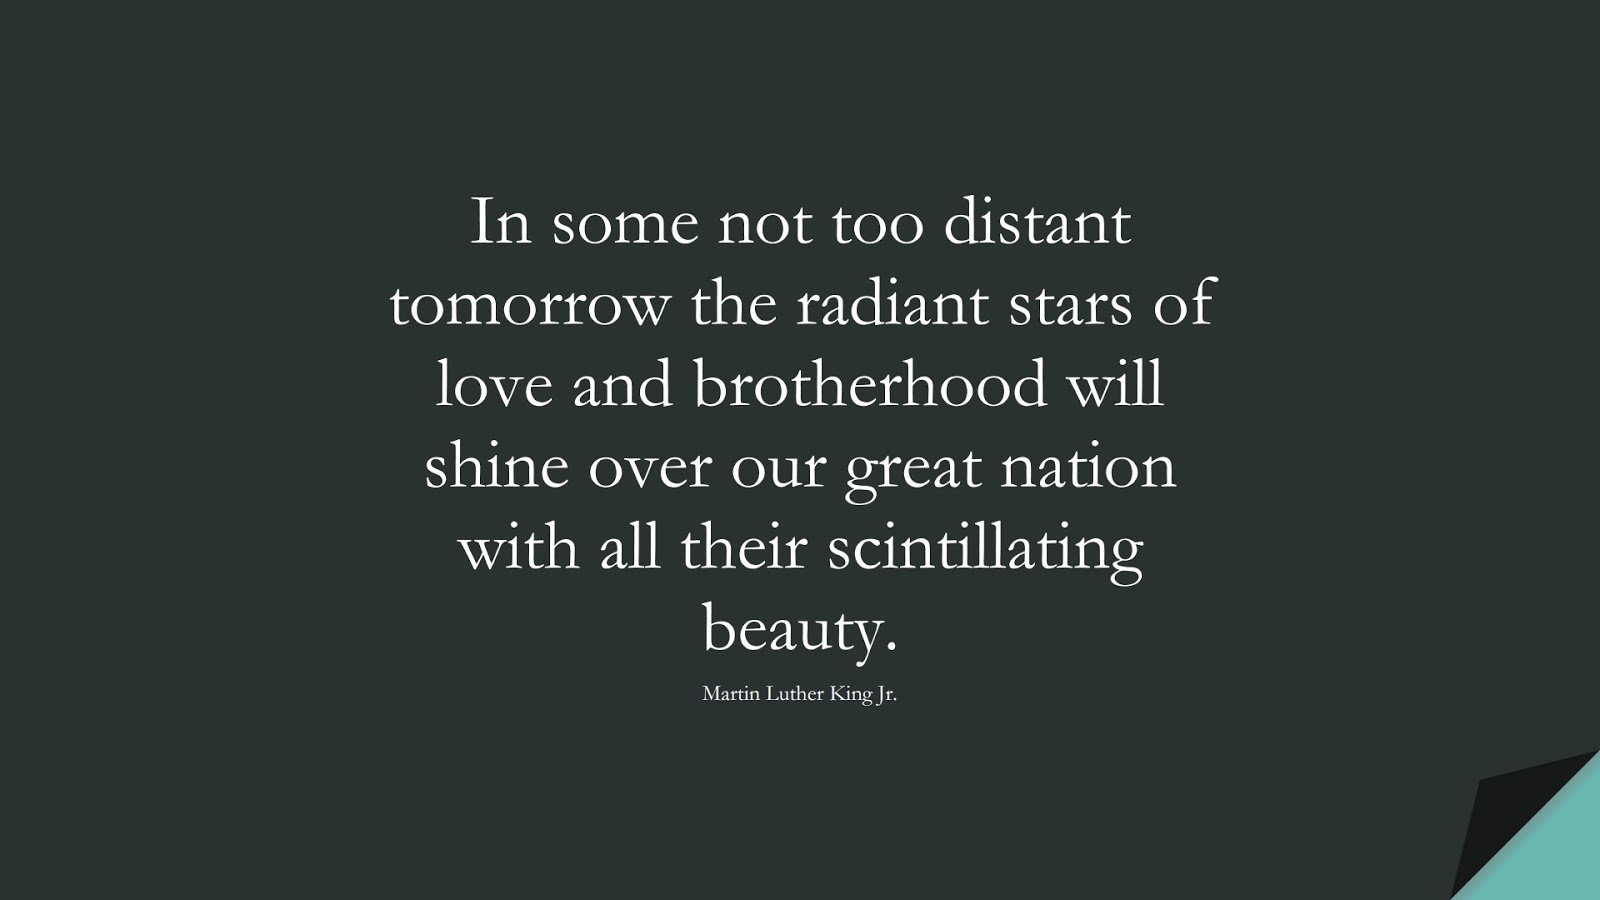 In some not too distant tomorrow the radiant stars of love and brotherhood will shine over our great nation with all their scintillating beauty. (Martin Luther King Jr.);  #MartinLutherKingJrQuotes